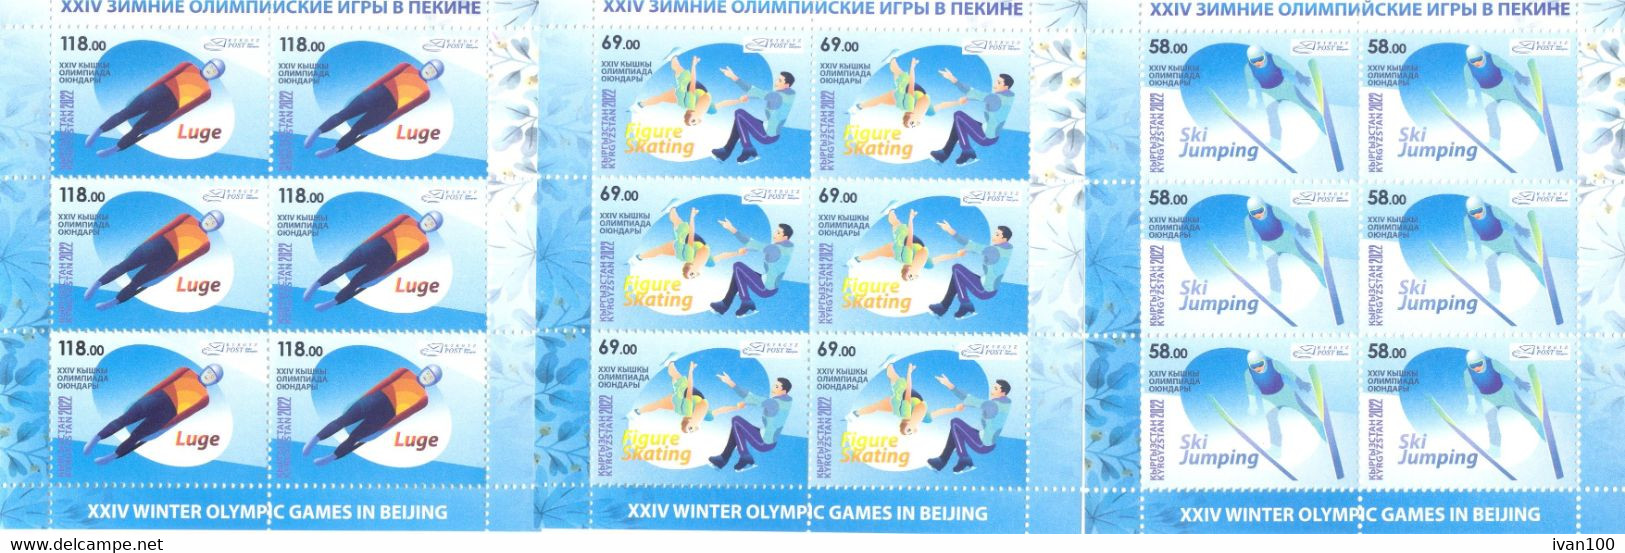 2022. Kyrgyzstan, Winter Olympic Games Beijing 2022, 3 Sheetlets Perforated, Mint/** - Kirghizstan